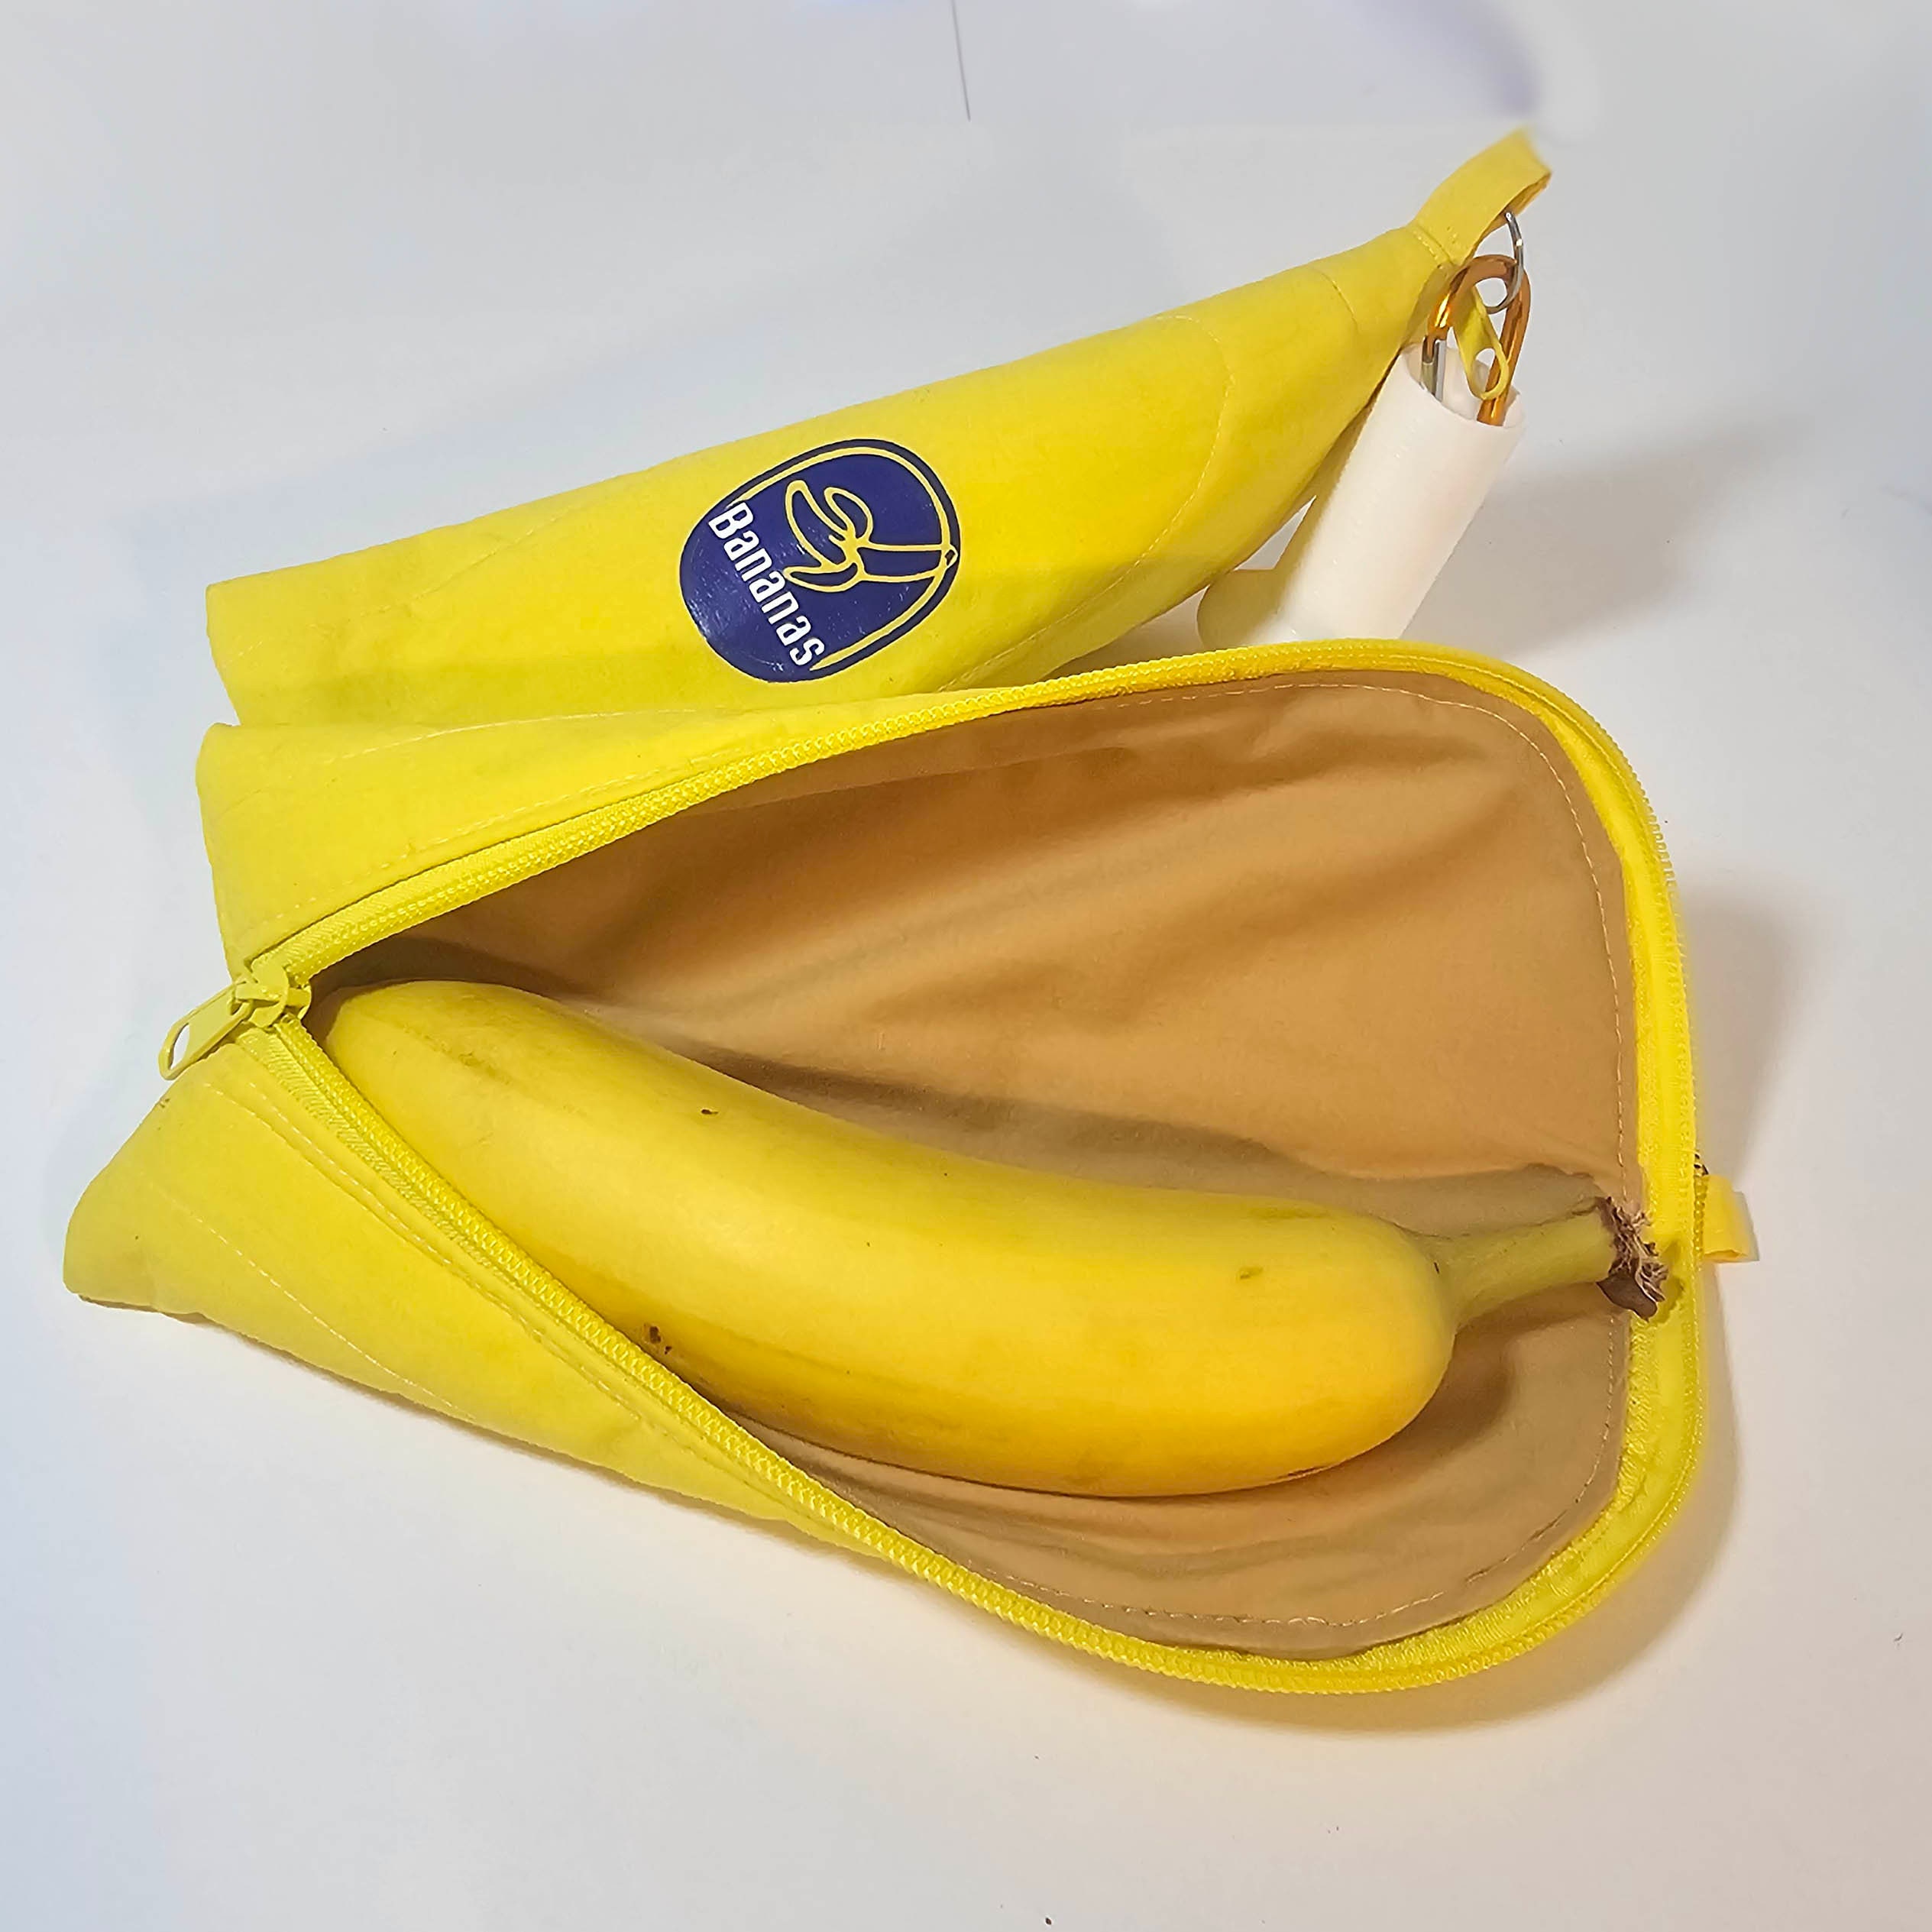 Buy Nidus 1pc Coin Purse Banana Bag Unisex Bag Kids Purse Children's Coin  Bags Jewelry Silicone Pencil Case Zipper Pouch Rubber Key Wall at Amazon.in